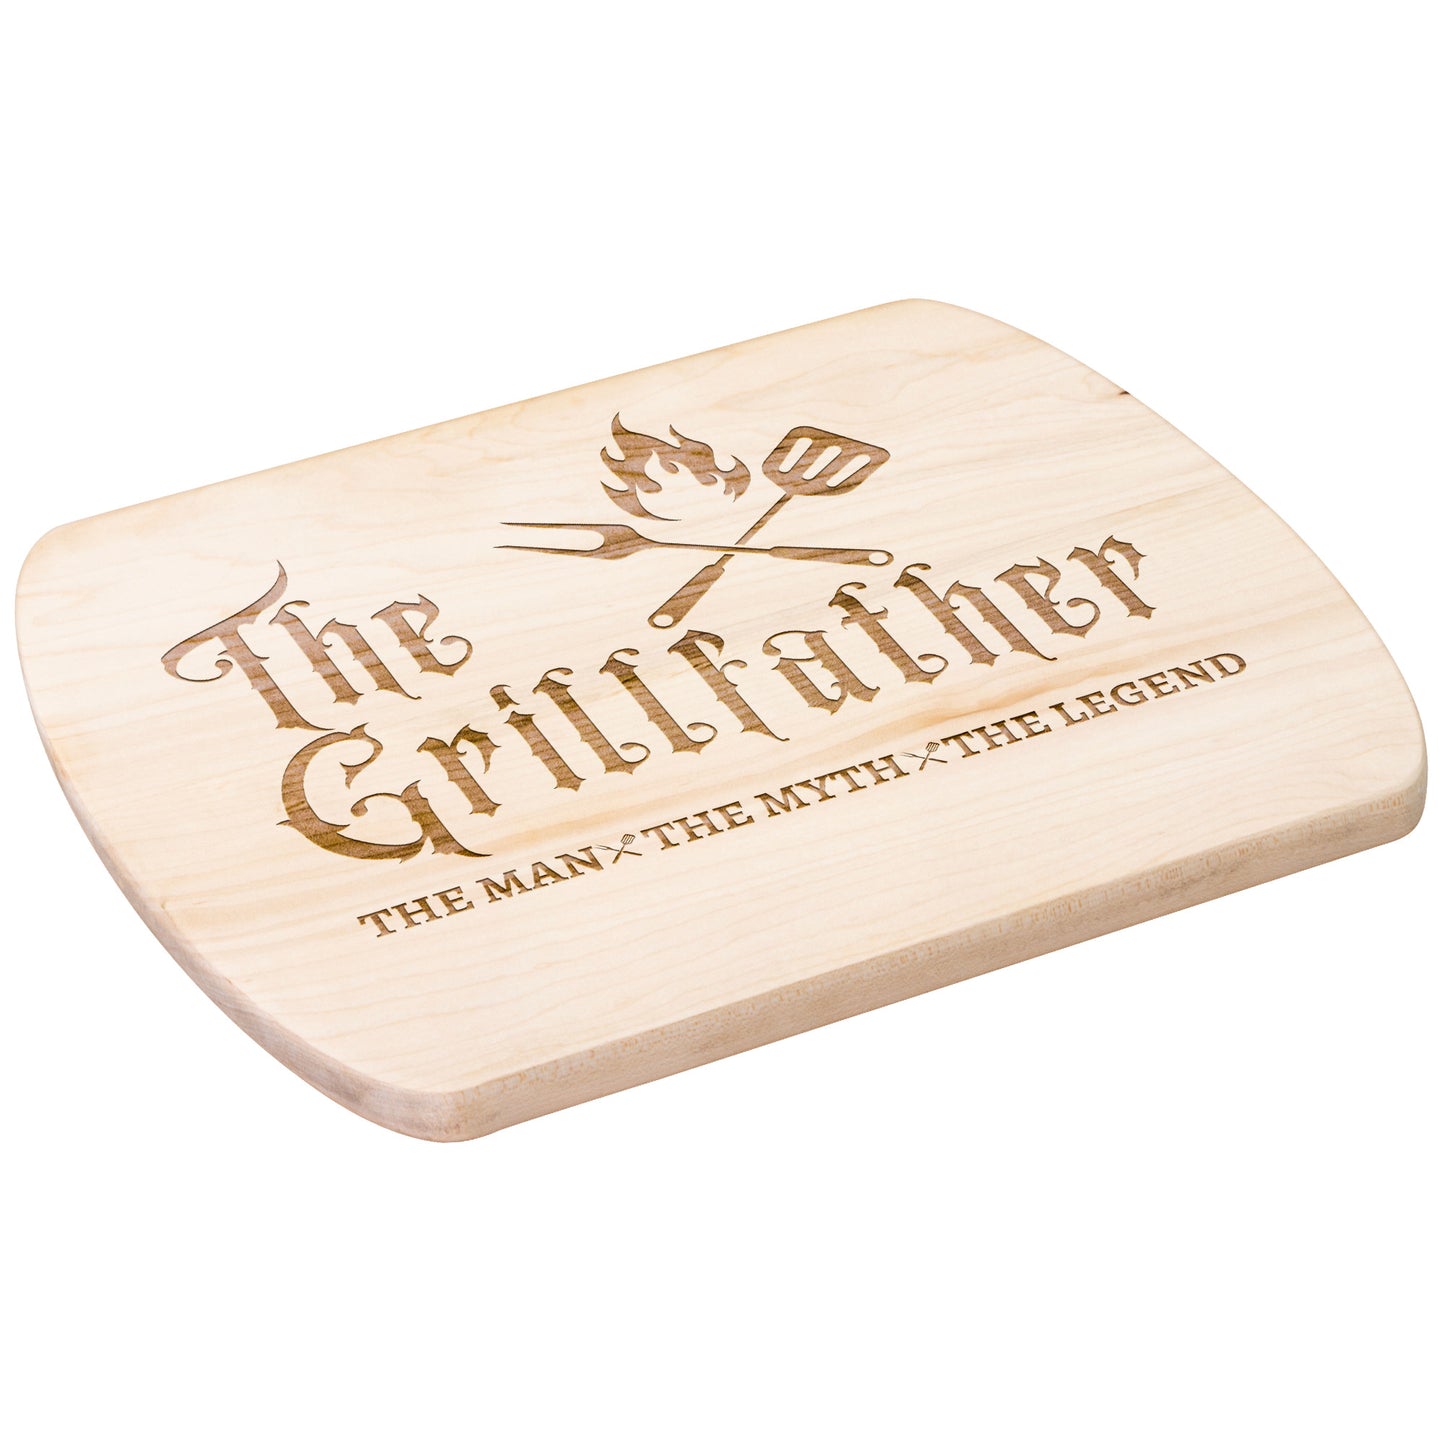 Gift For Him | The Grillfather Hardwood Oval Cutting Board